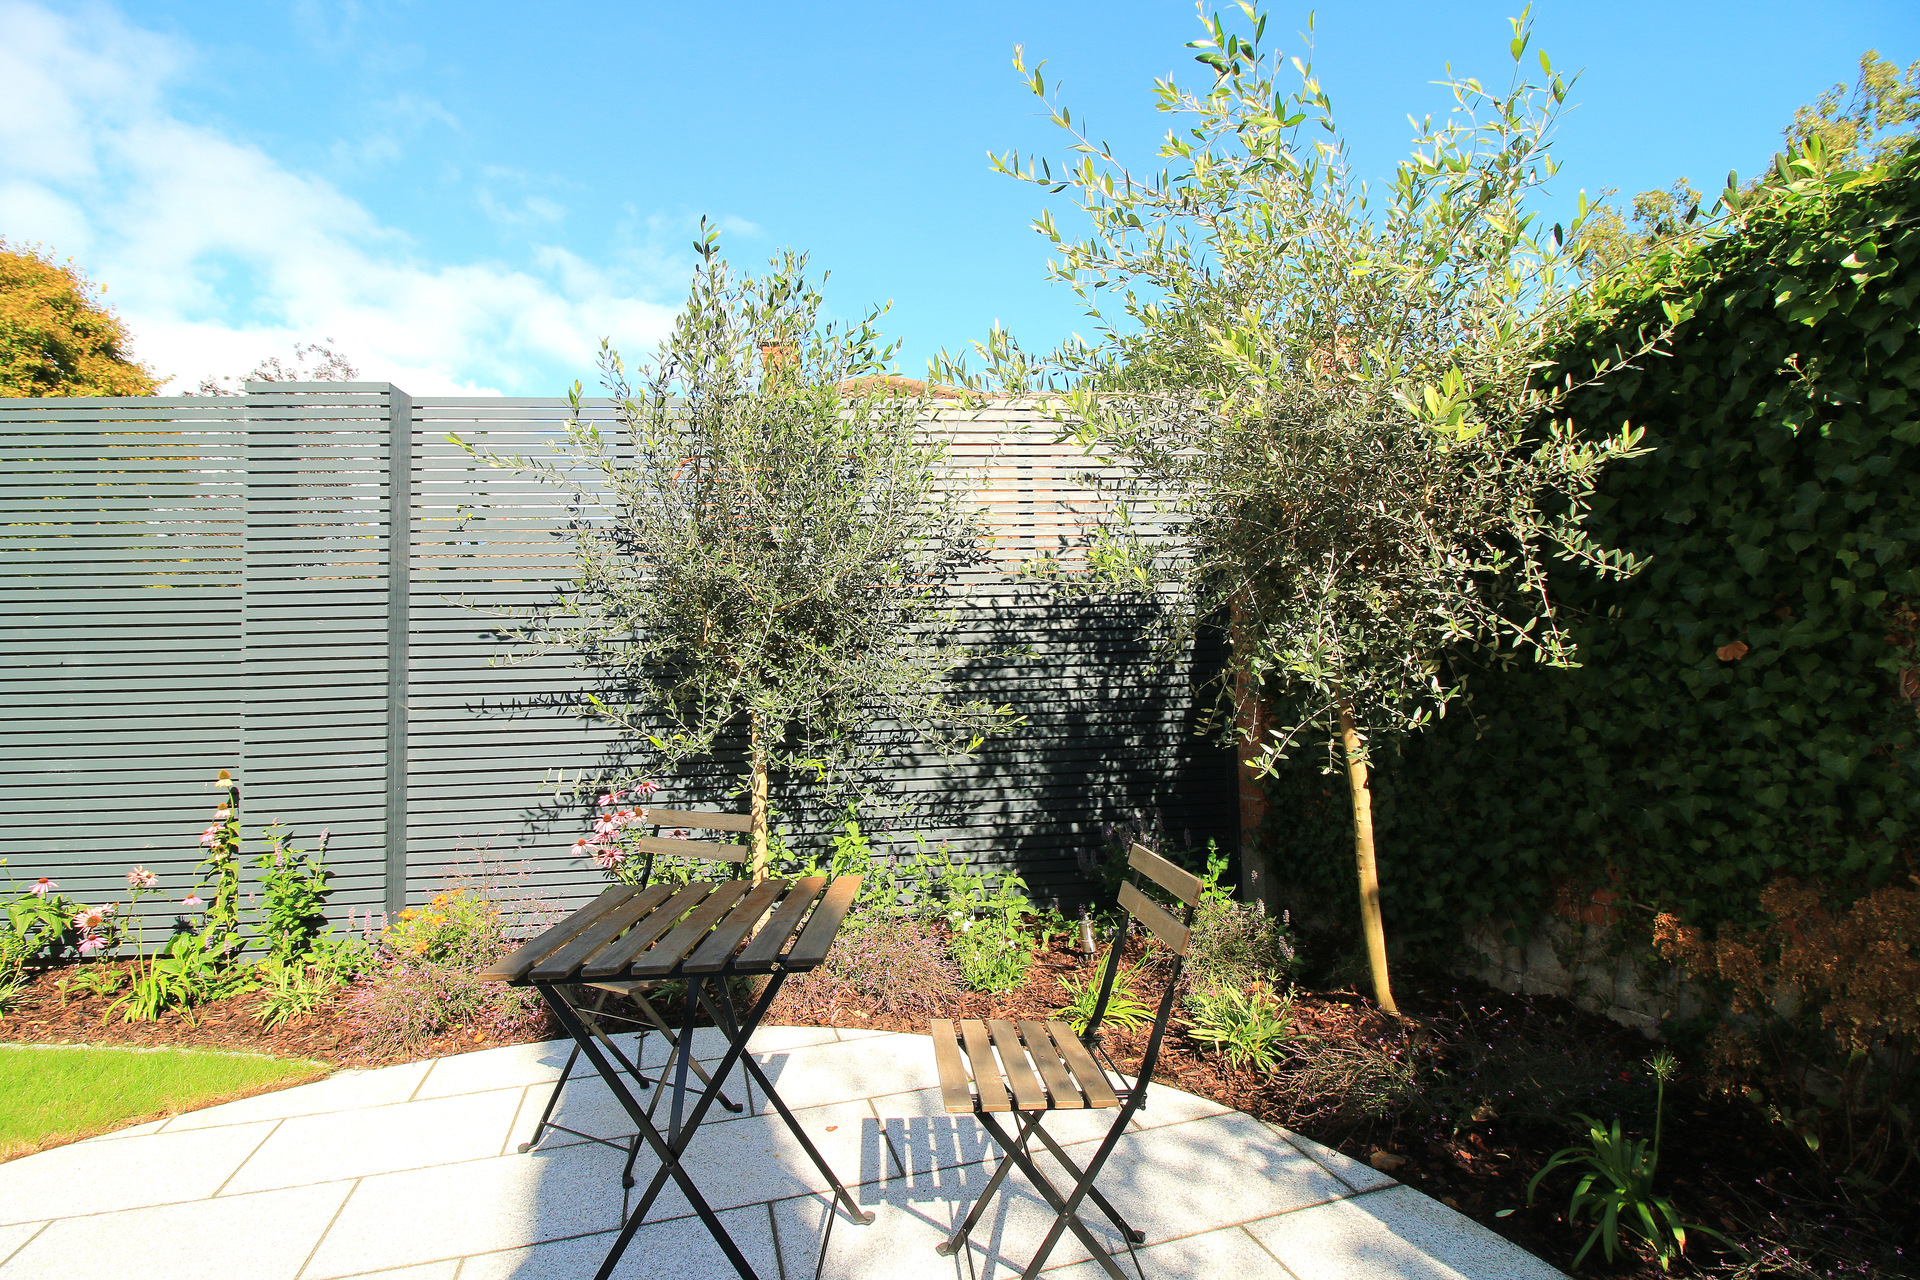 Family Garden Design & Landscaping in Blackrock, Co Dublin includes custom made horizontal slatted fencing, granite patio and paving, granite sett edged planted borders & mowing edges, stainless steel garden spike lighting, Classic Garden Elements Bagatelle Rose Arch, and a stunning planting scheme of diverse specimen olive trees, mature shrubs & perennials.